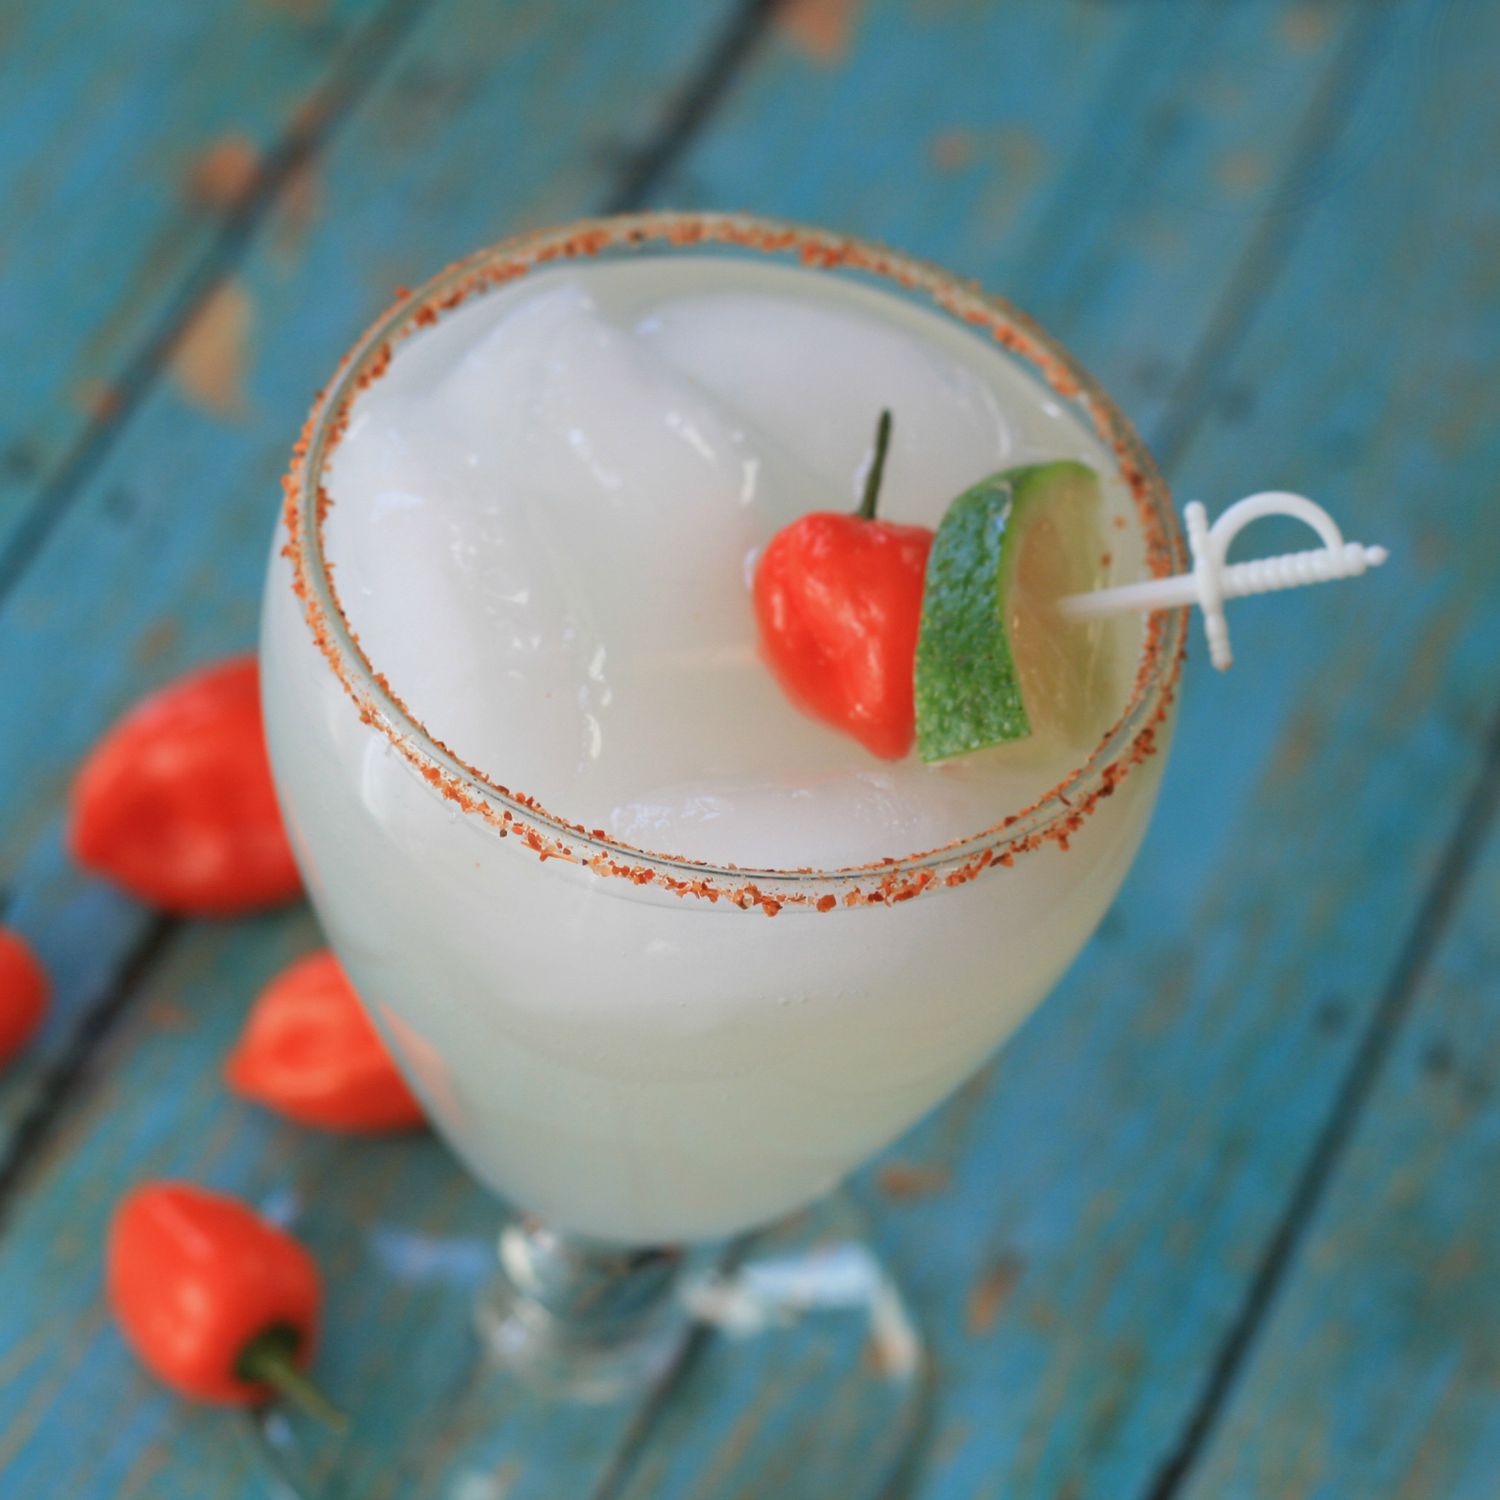 Paloma Picante on a wooden background